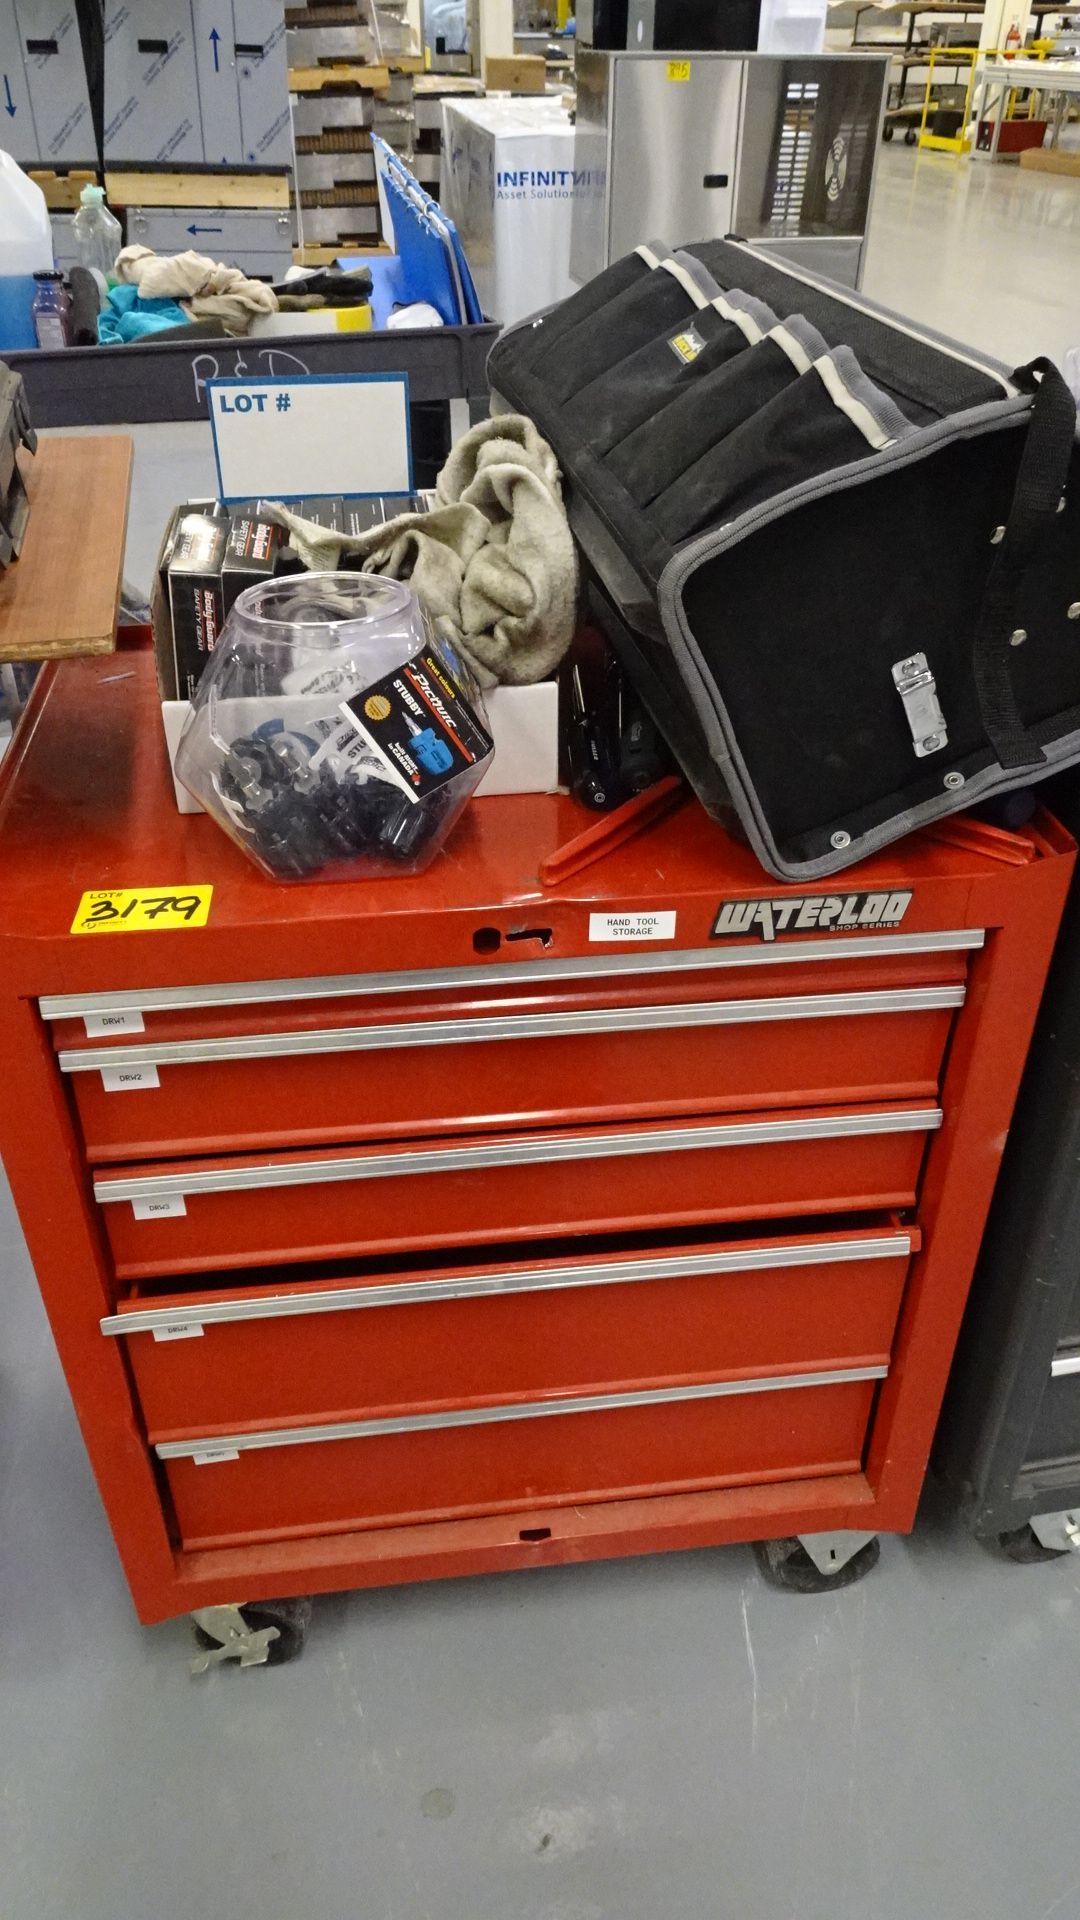 WATERLOO 5-DRAWER PORTABLE TOOLBOX W/ CONTENTS (REUTER)